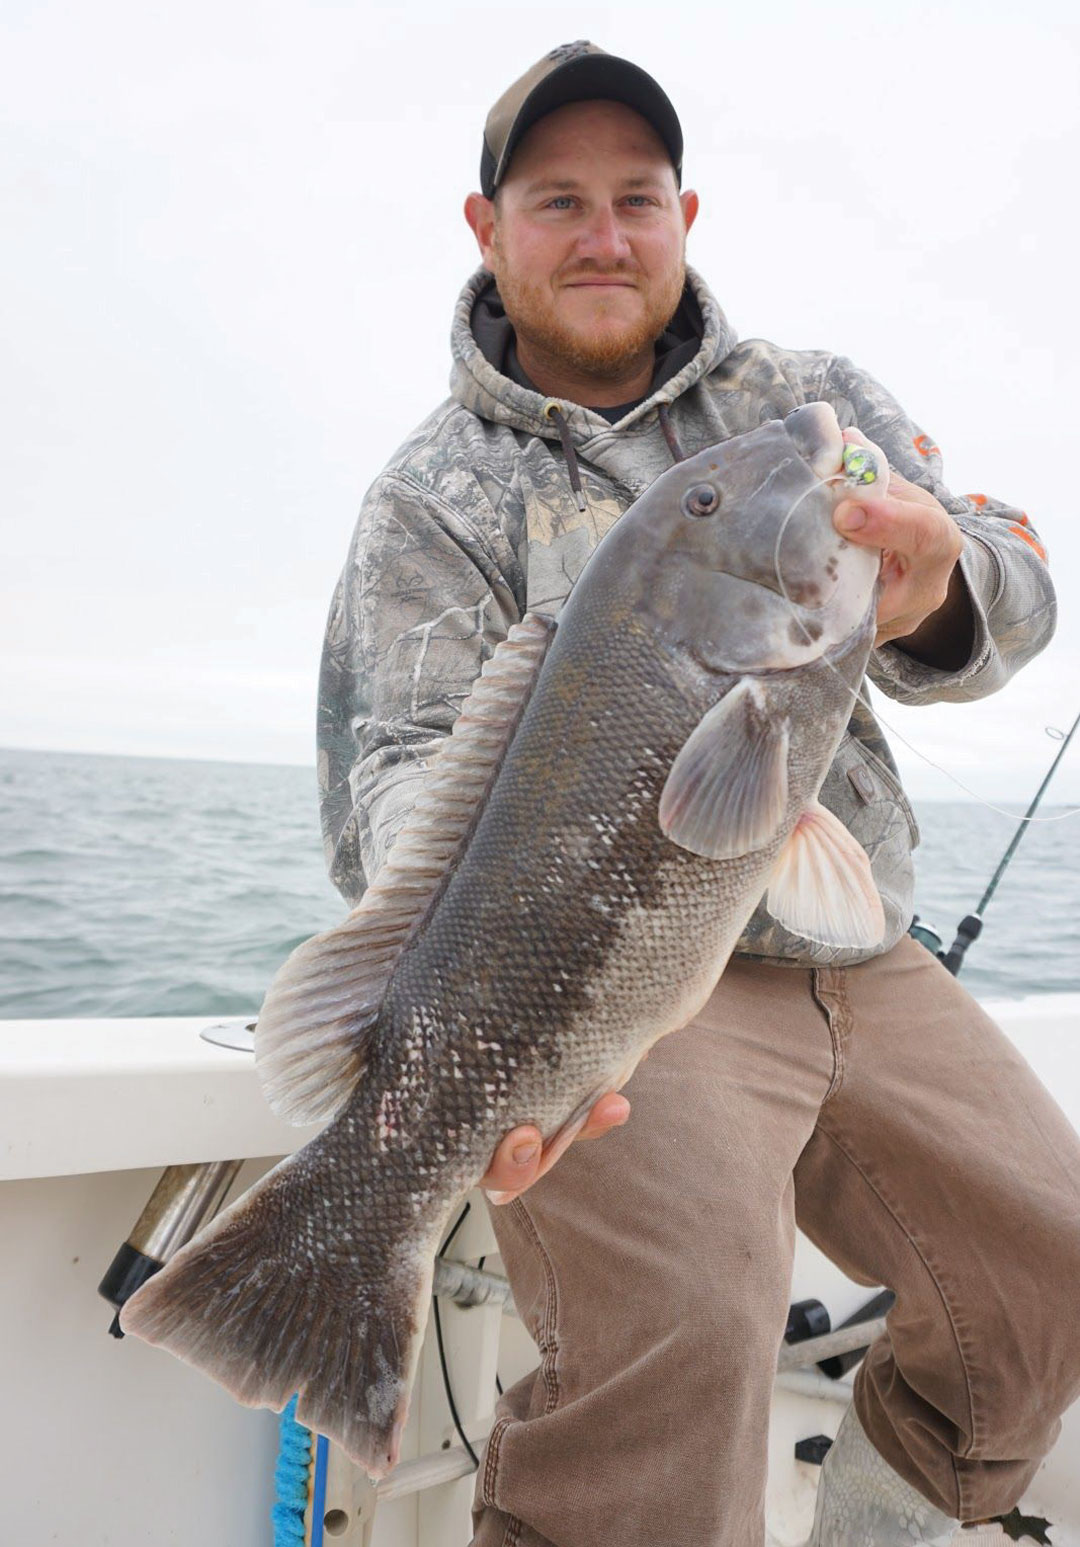 Break Away From Big Structure for Big Tautog